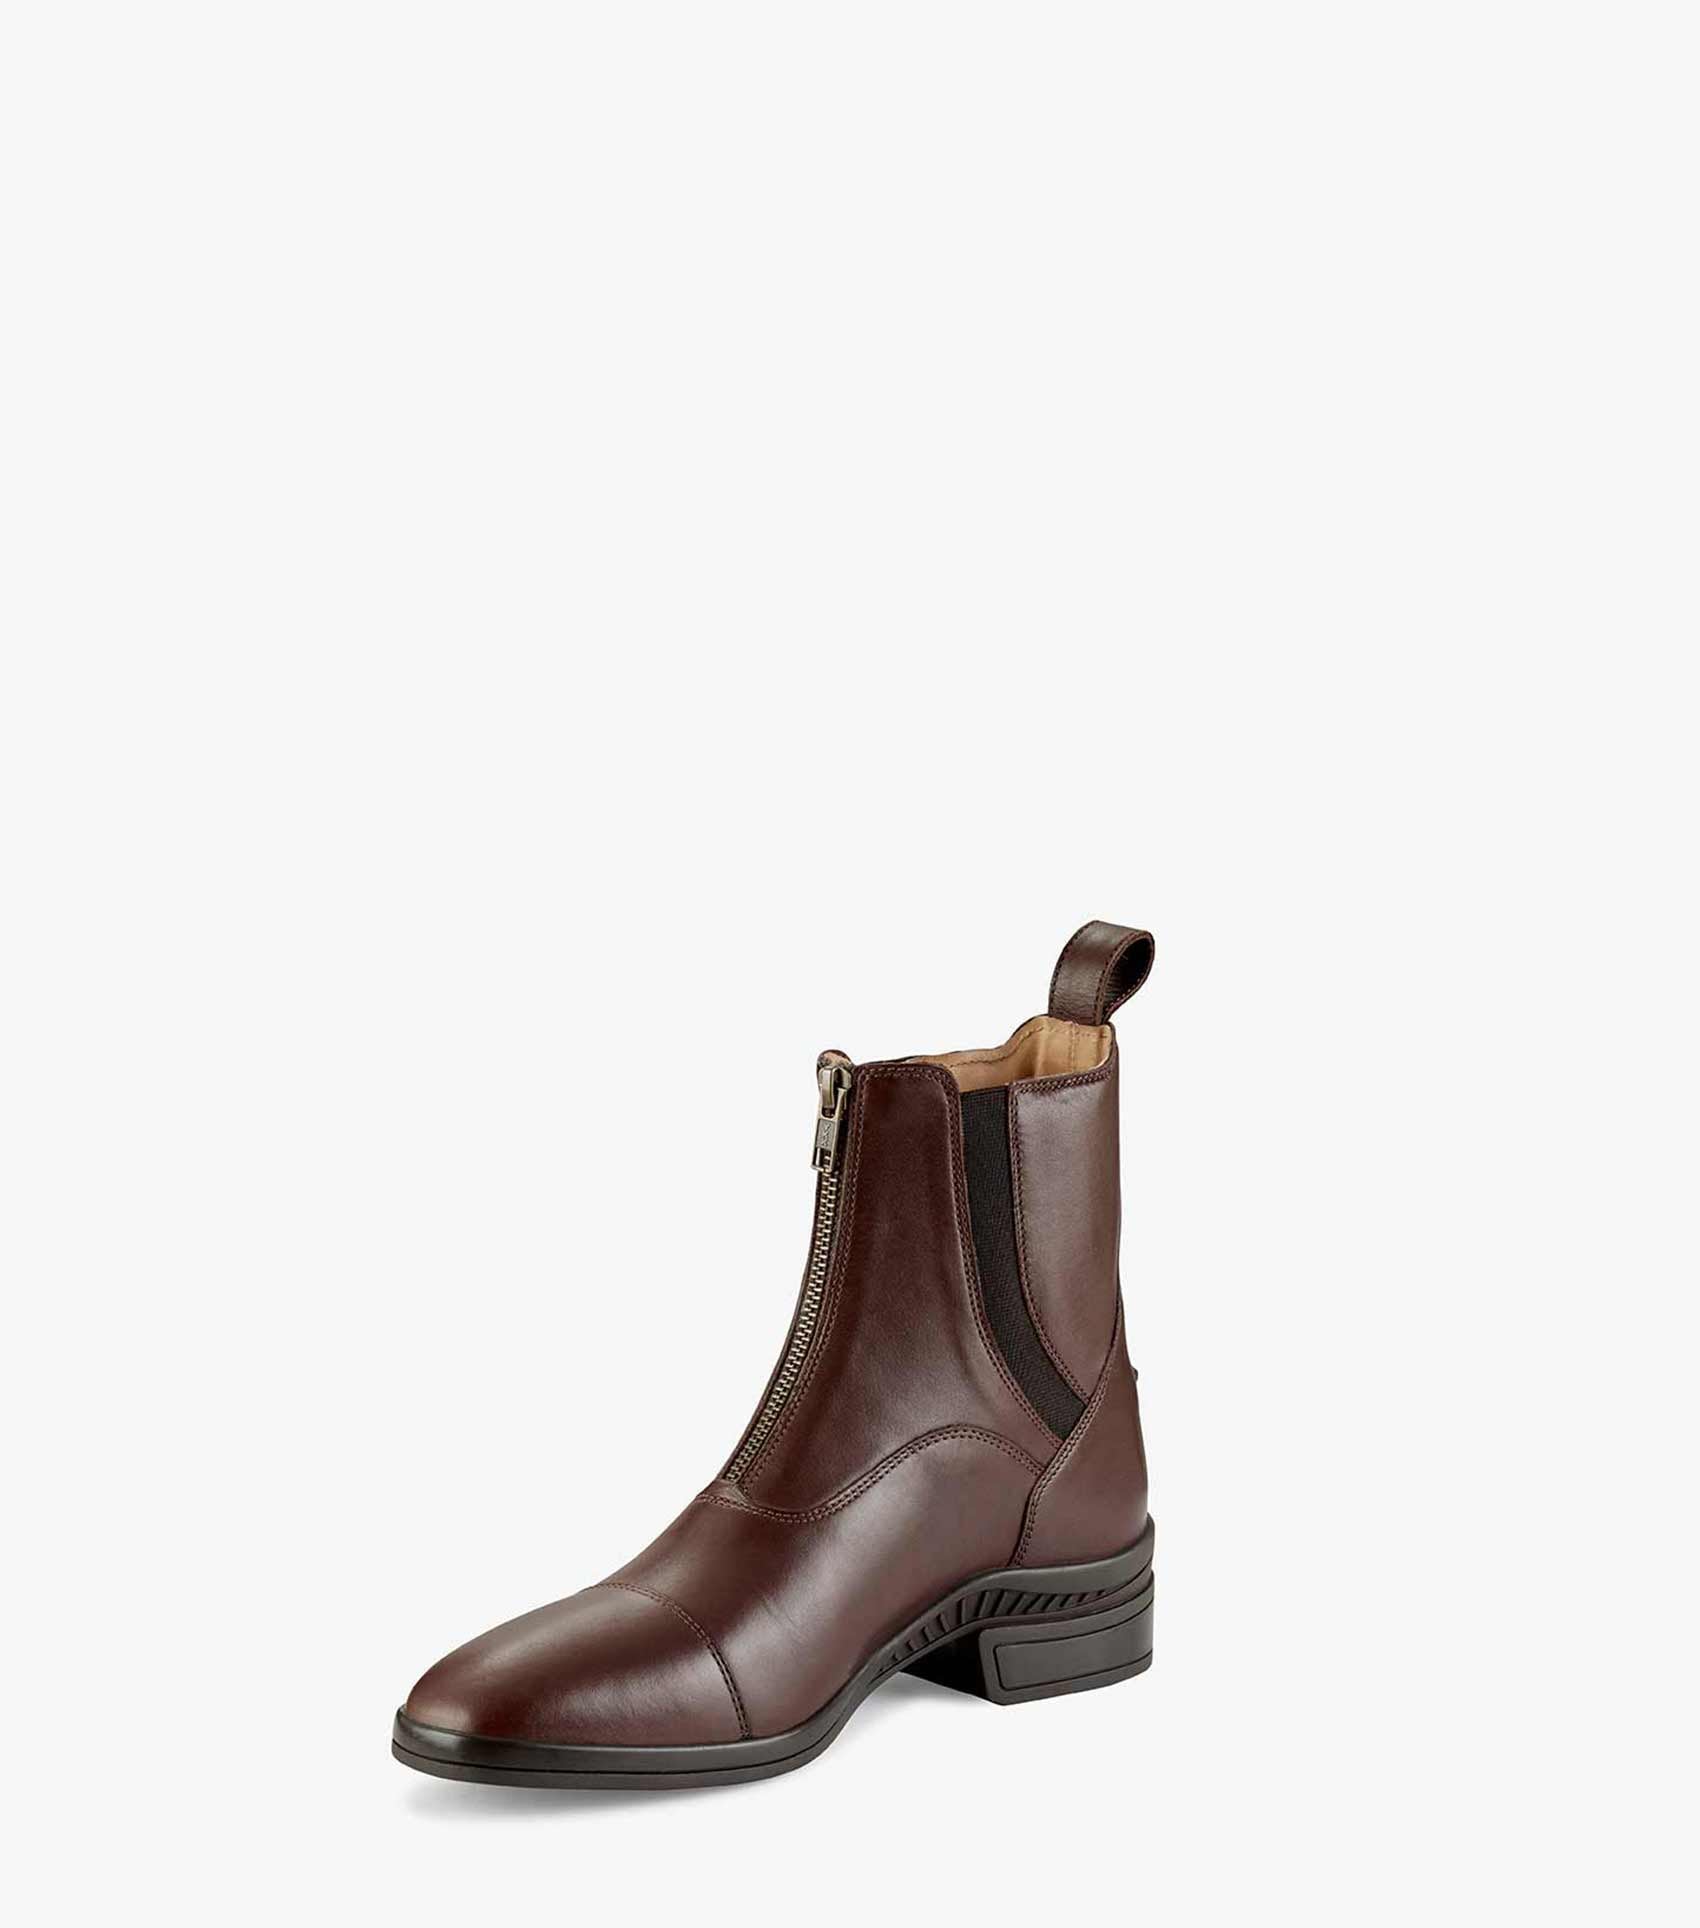 Balmoral Leather Boots